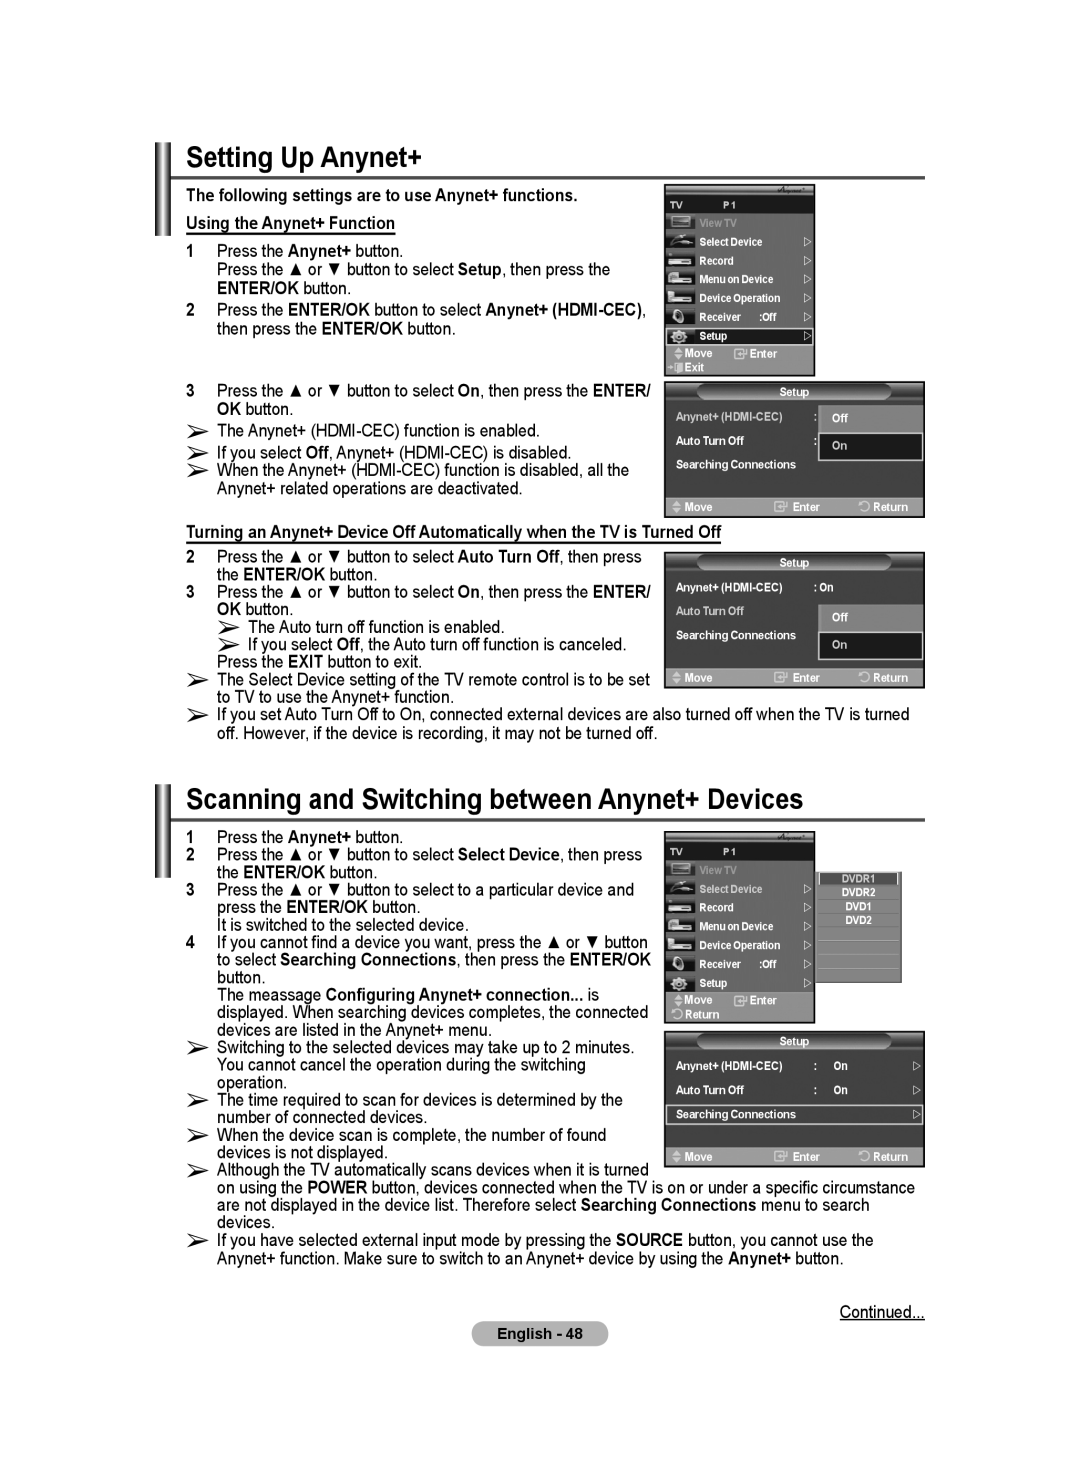 Samsung BN68-01171B-03 manual Setting Up Anynet+, Scanning and Switching between Anynet+ Devices 